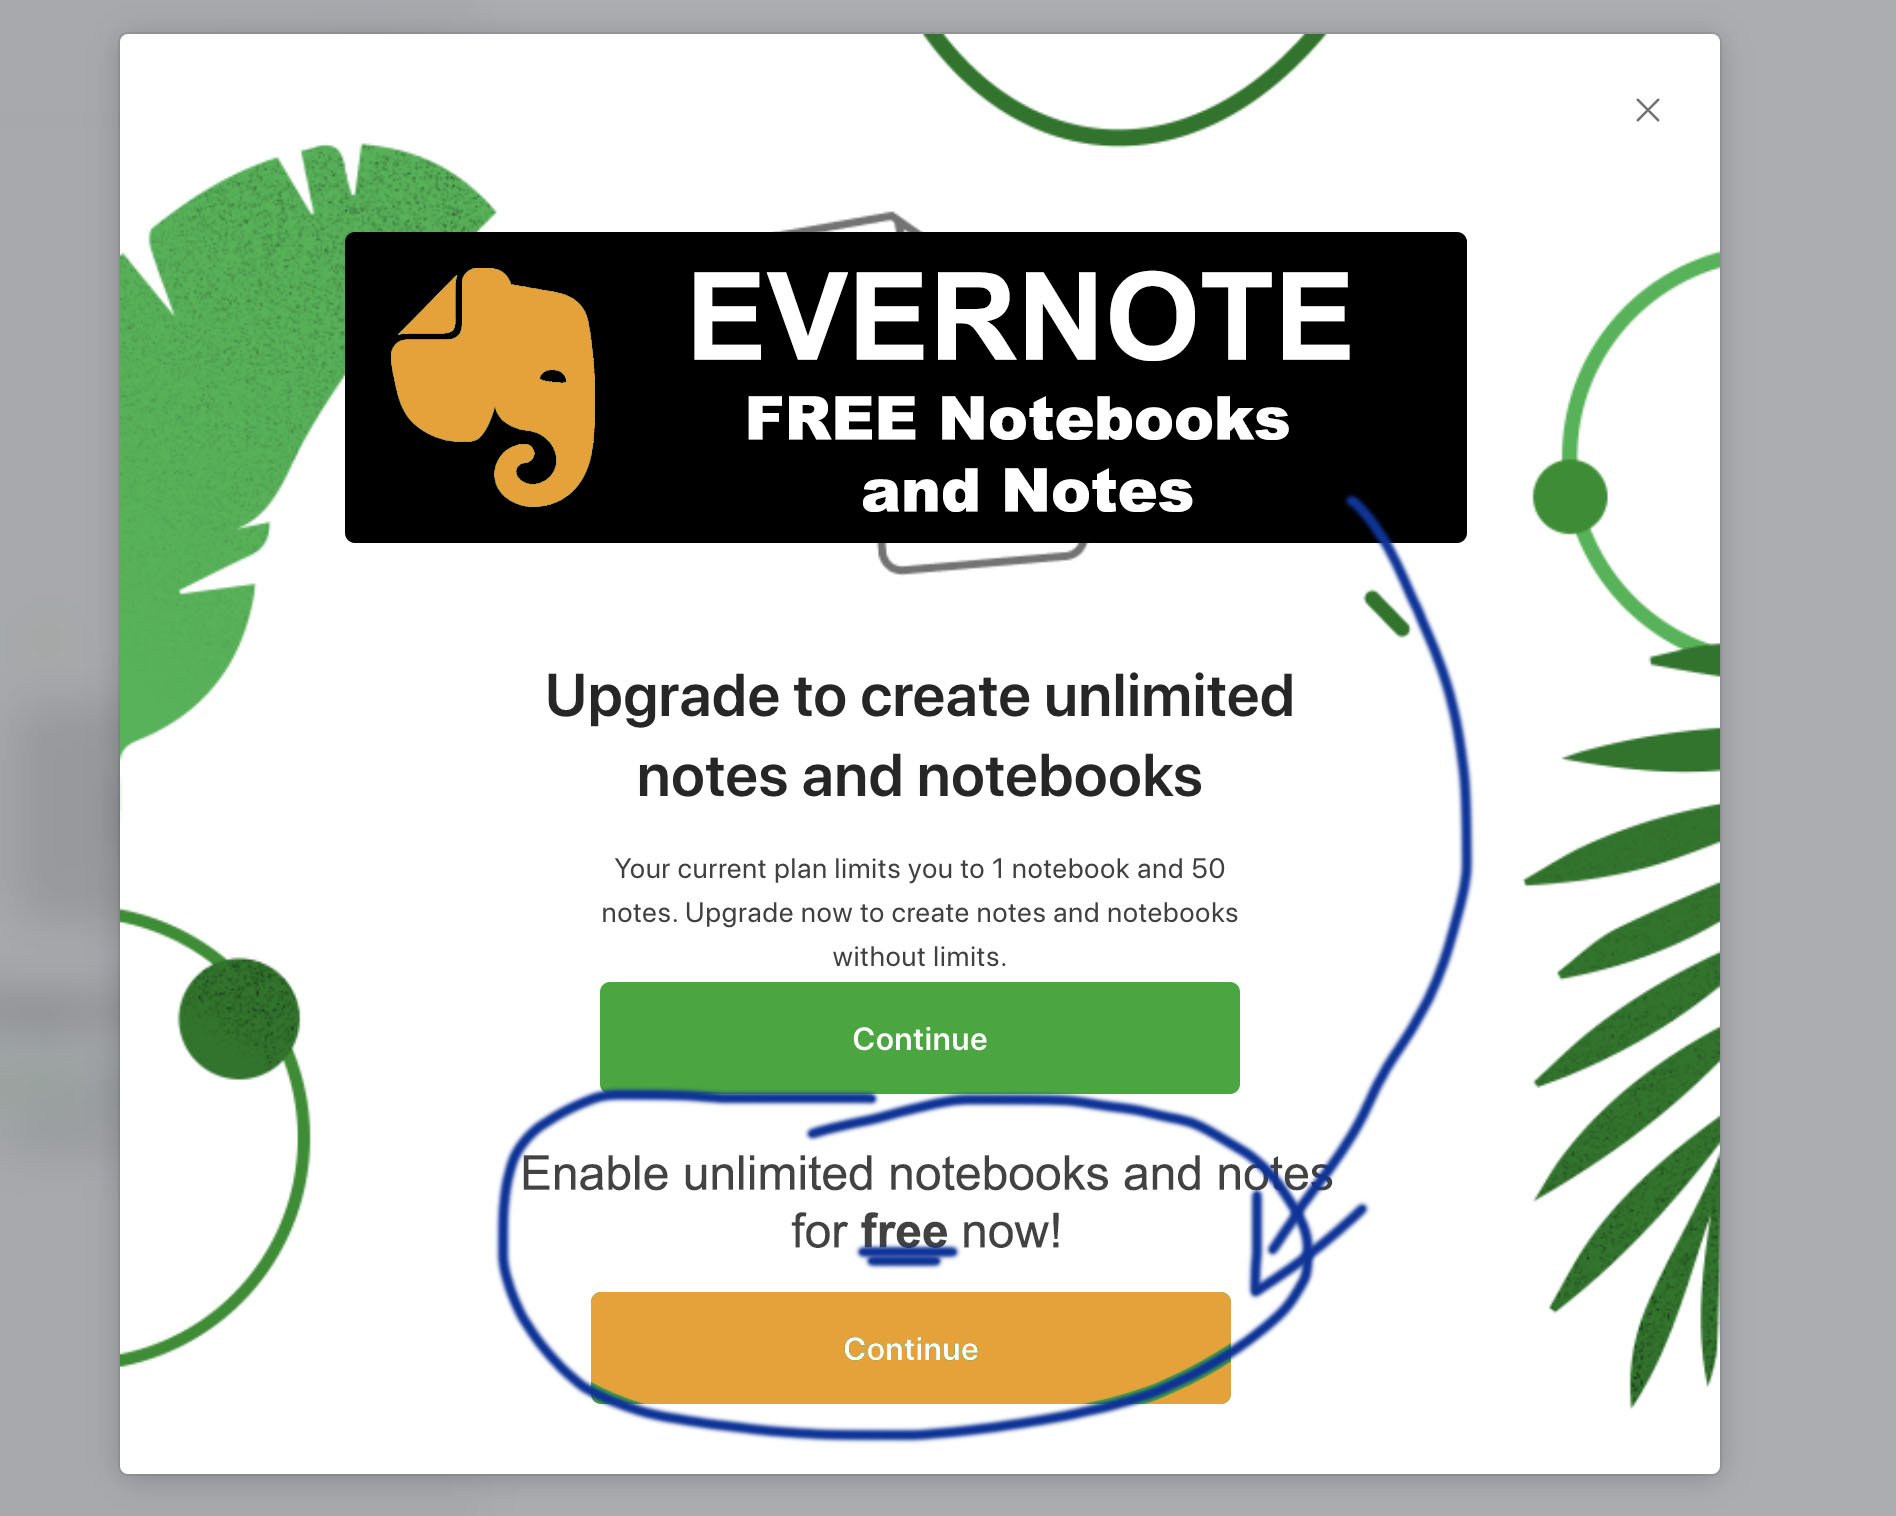 evernote-free-account-can-still-create-unlimited-notes